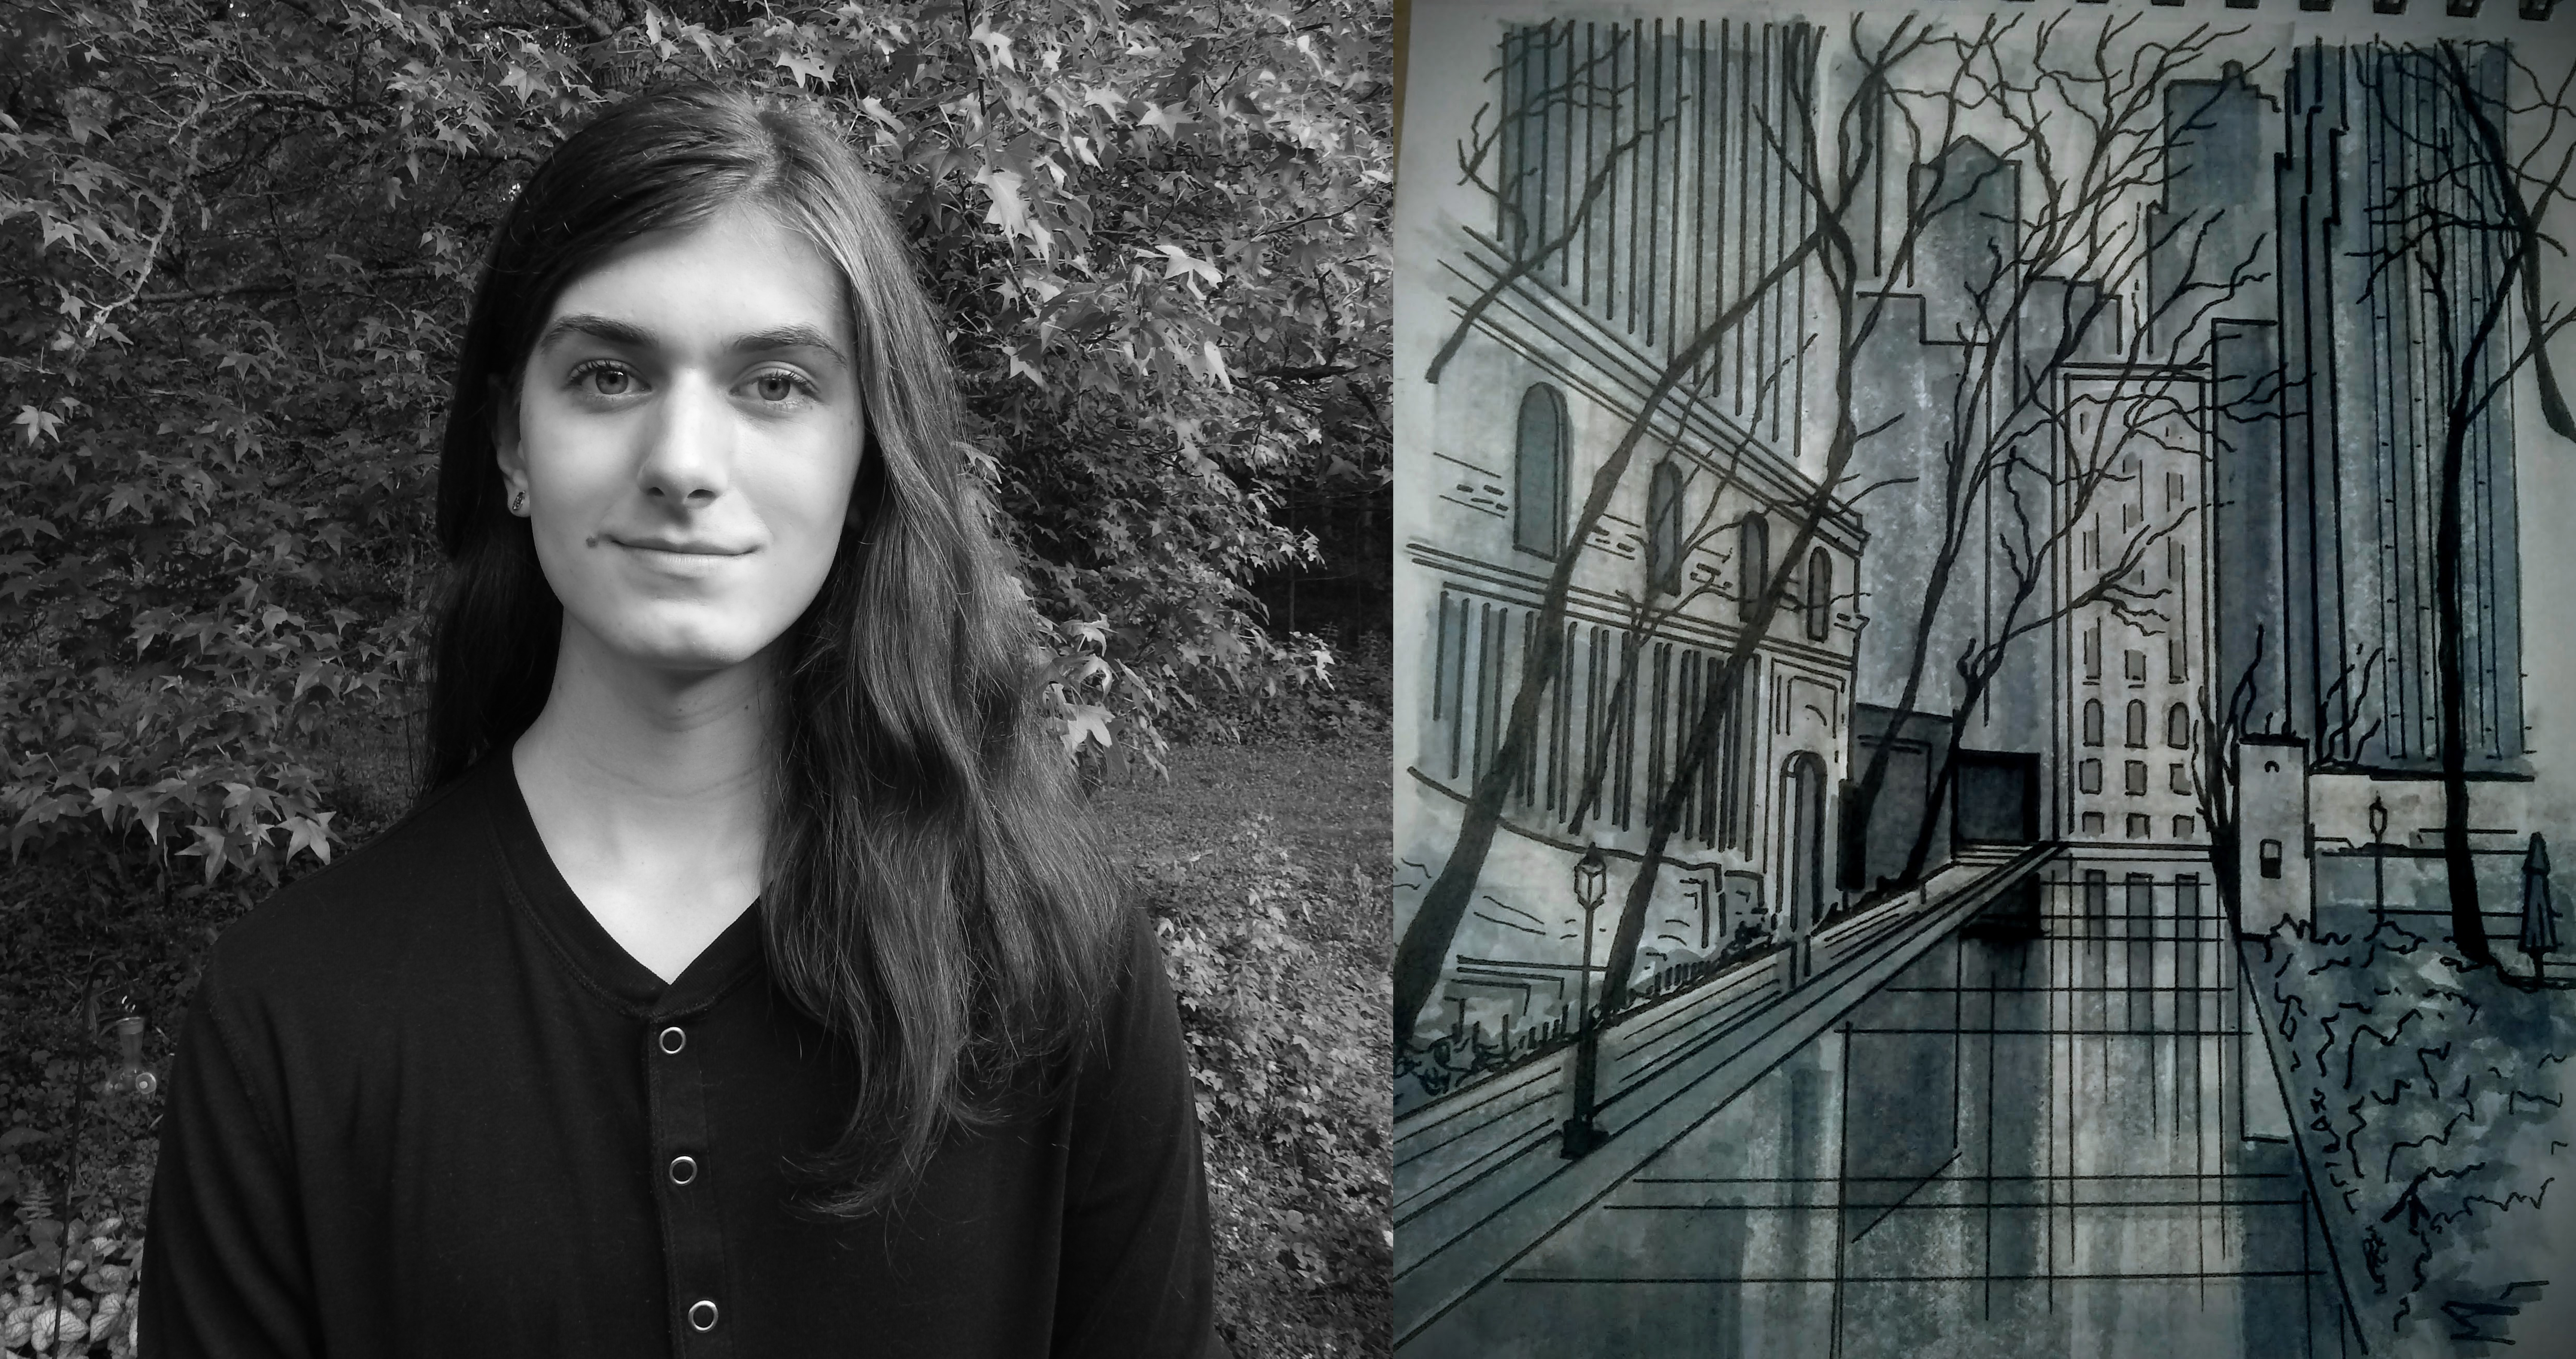 On the left, a black and white photograph of a young white woman with long dark hair and a black shirt, smiling. On the right, a black and white illustration of a city scene in the winter.